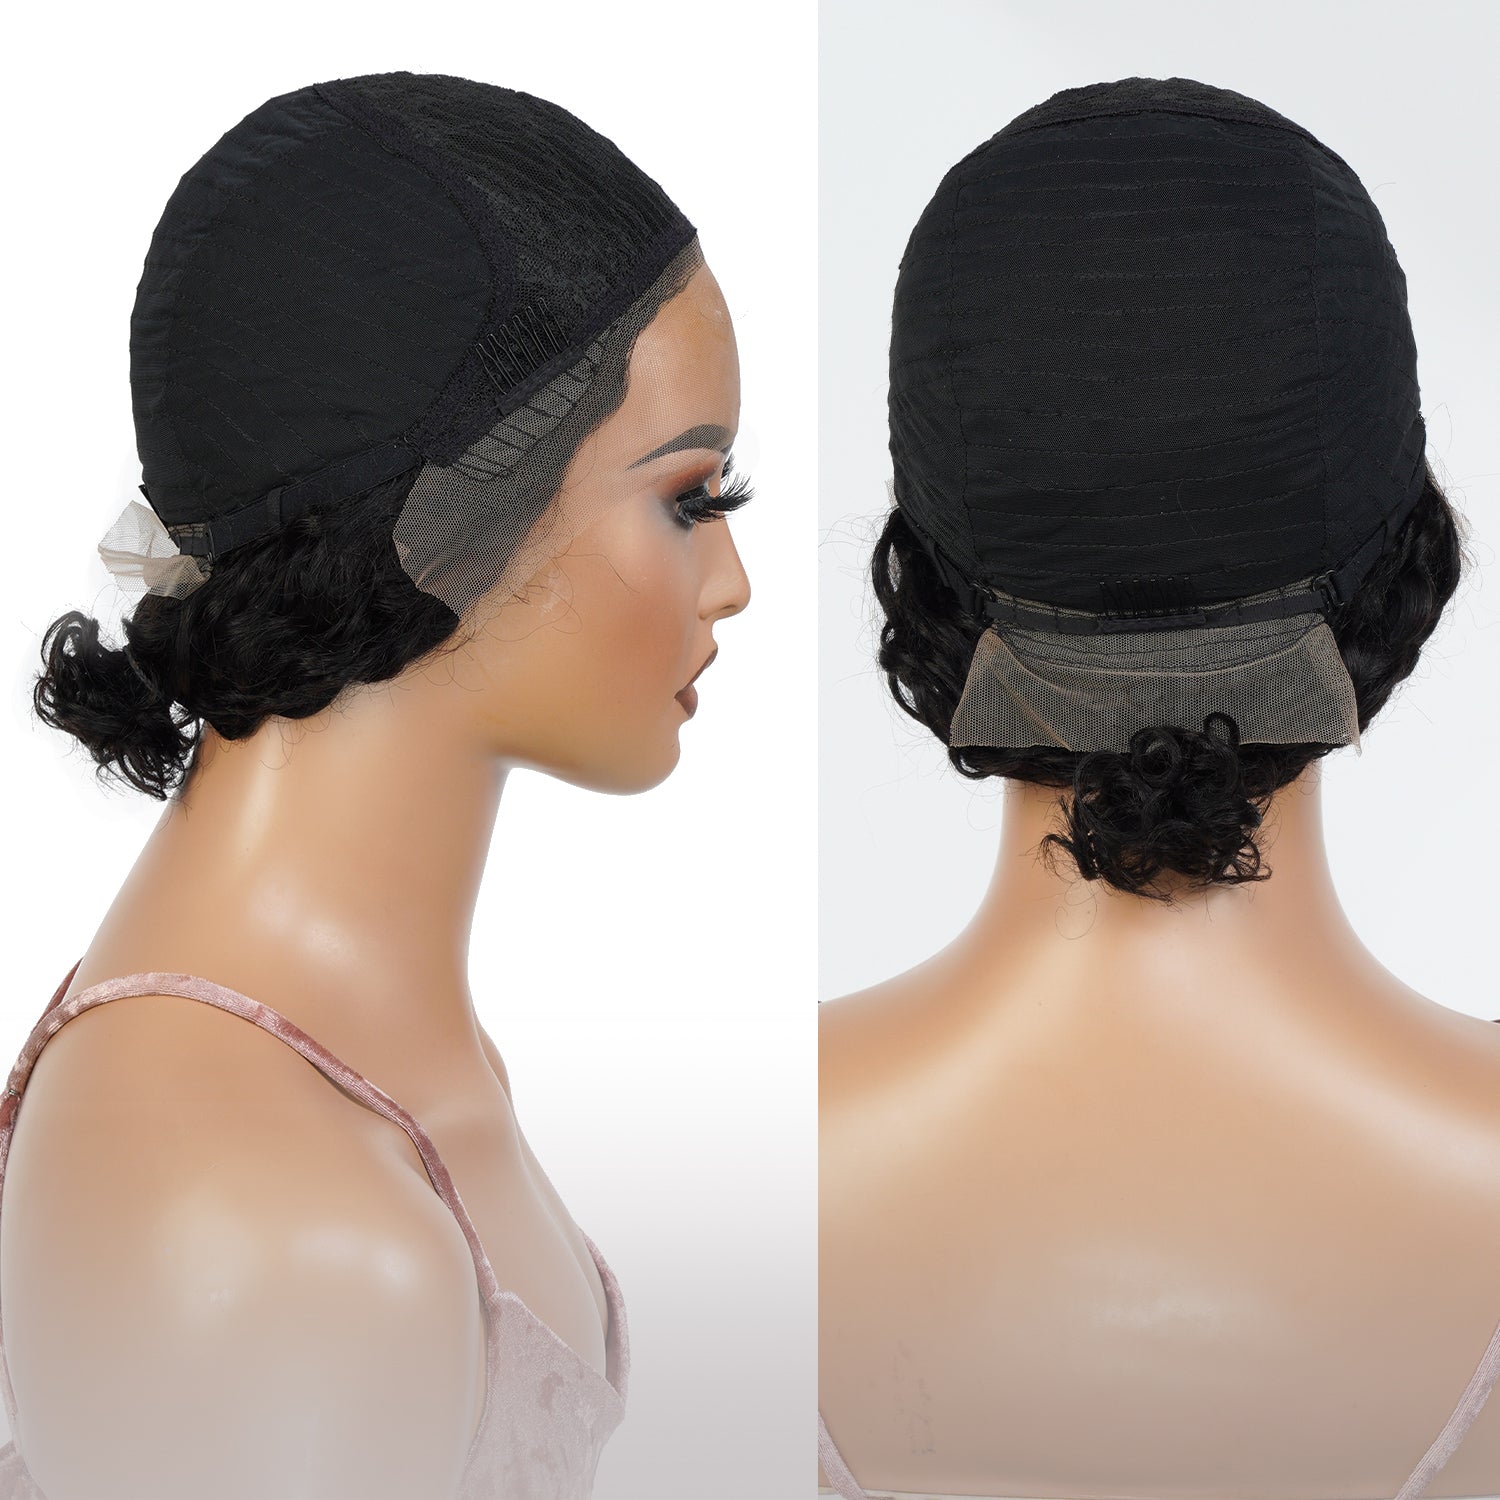 Shop affordable human hair wig. Center part short human hair bob lace front wigs made with Unprocessed Virgin Human hair, It has natural hairline which can be customized, Fits All Face Shapes. Glueless Minimalist Lace Bob Wig, Short curly bob is perfect for everyday use or any other special occasion, Ready-to-wear, Durable HD Lace that blend in perfectly